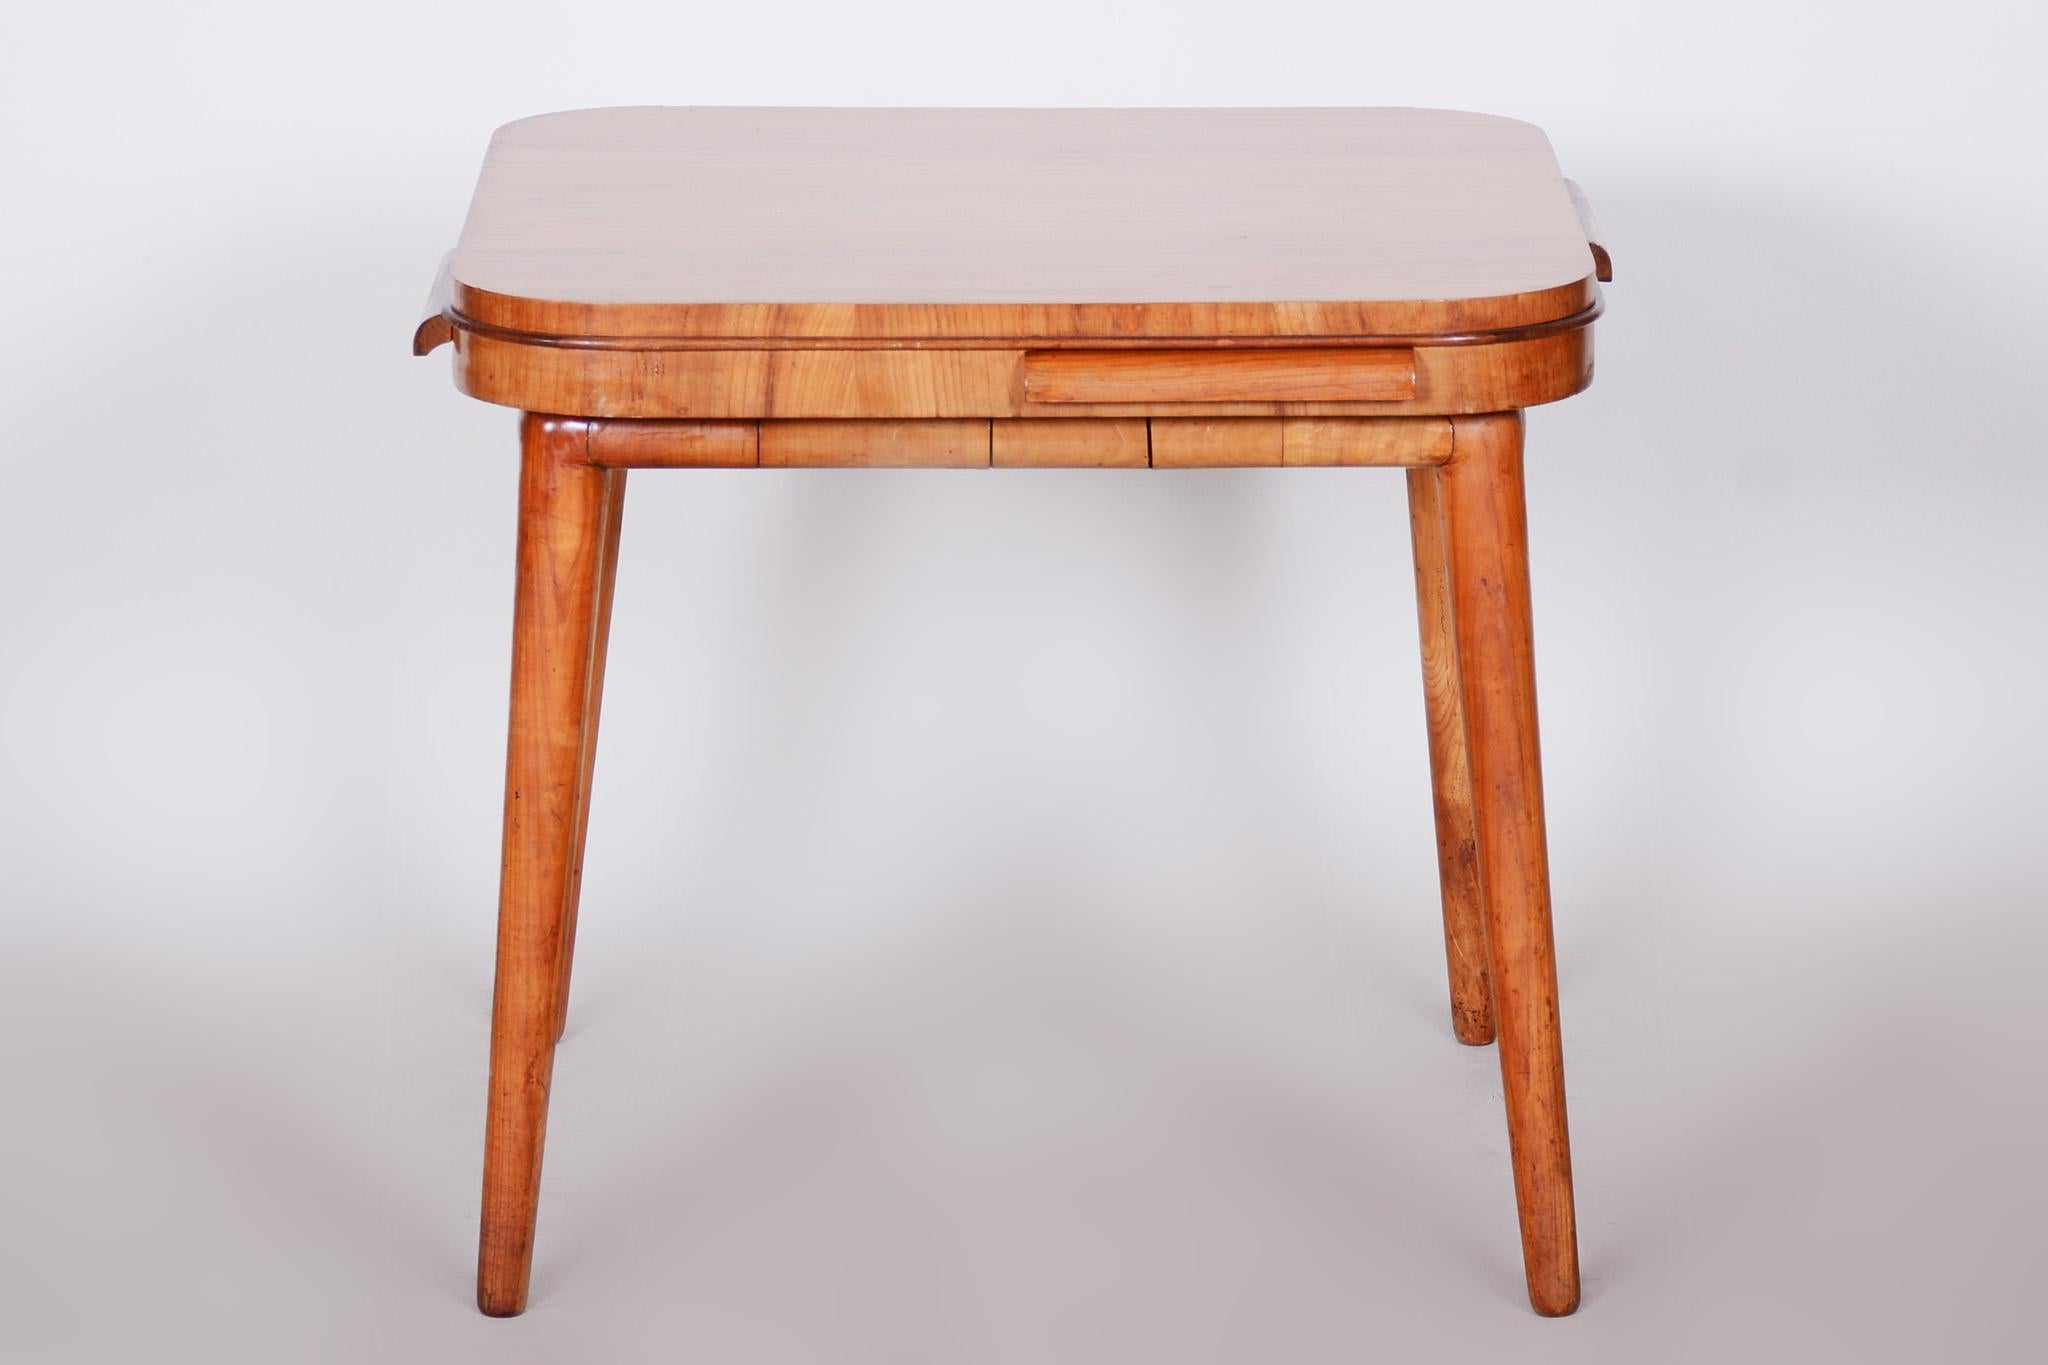 Mid-20th Century Restored Art Deco Cherry Tree Card Table, New Varnish, Czechia, 1940s For Sale